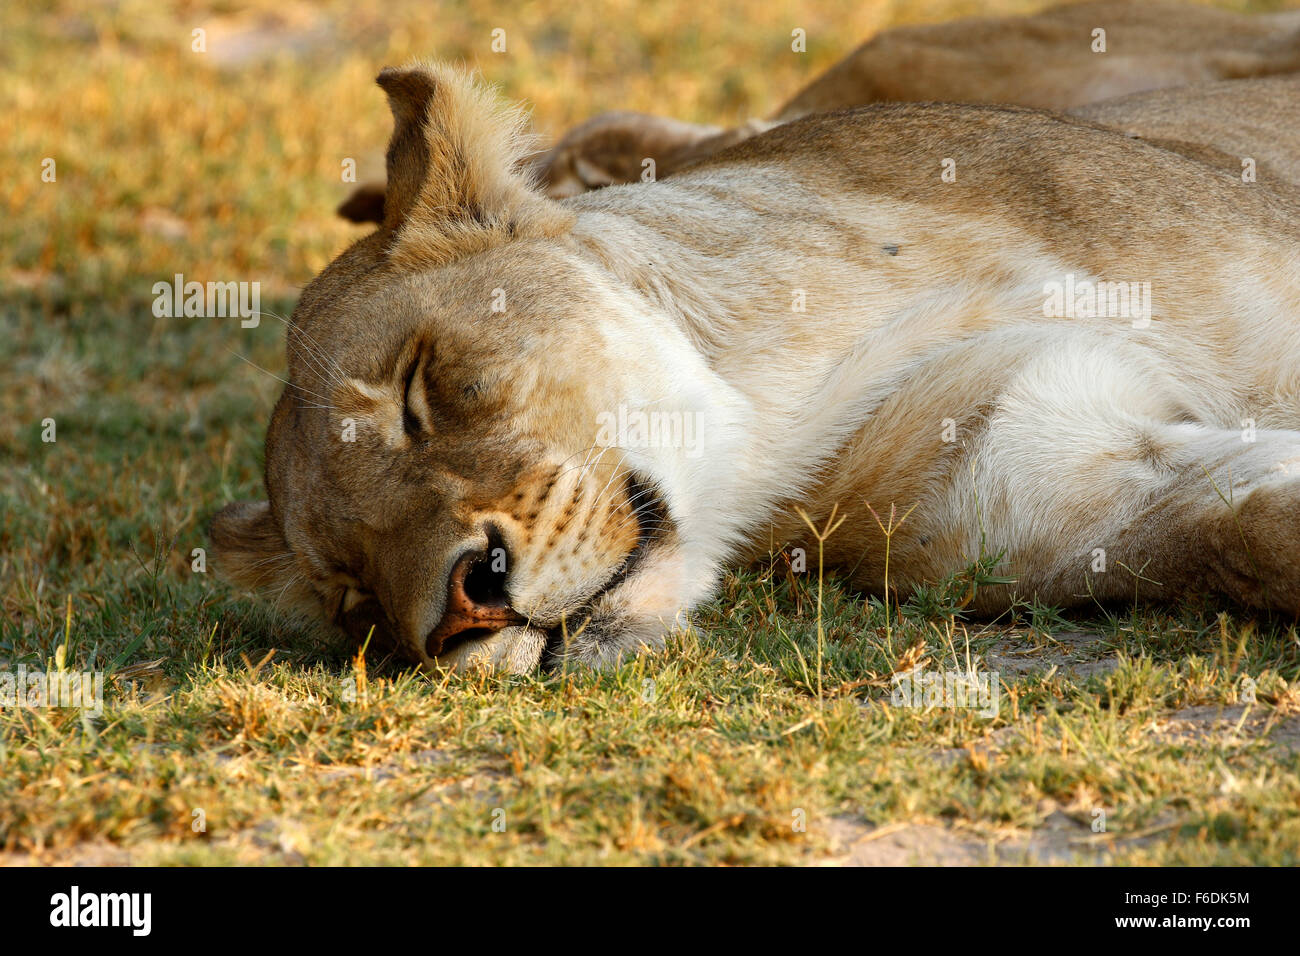 Sleeping African lions during the heat of the day time Stock Photo